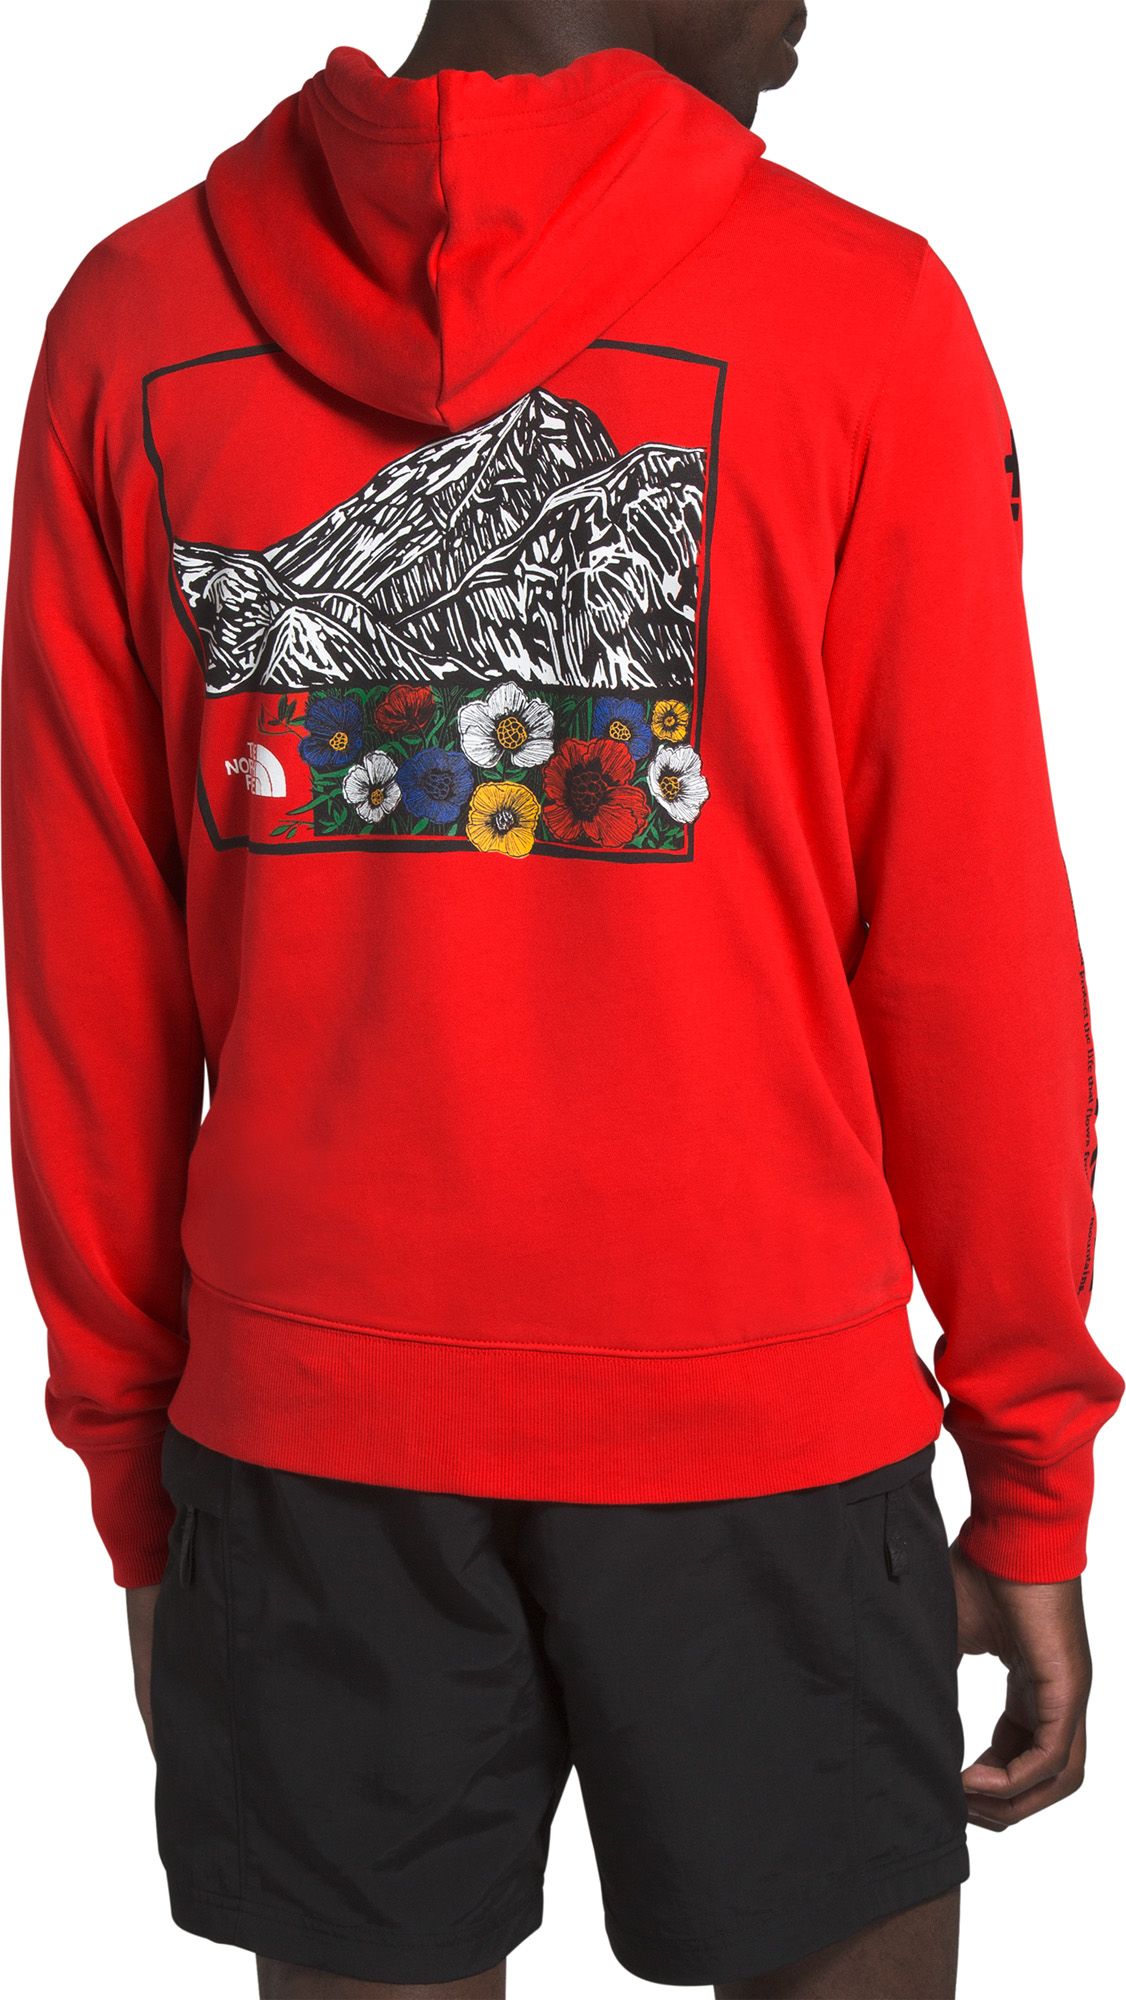 red north face sweater